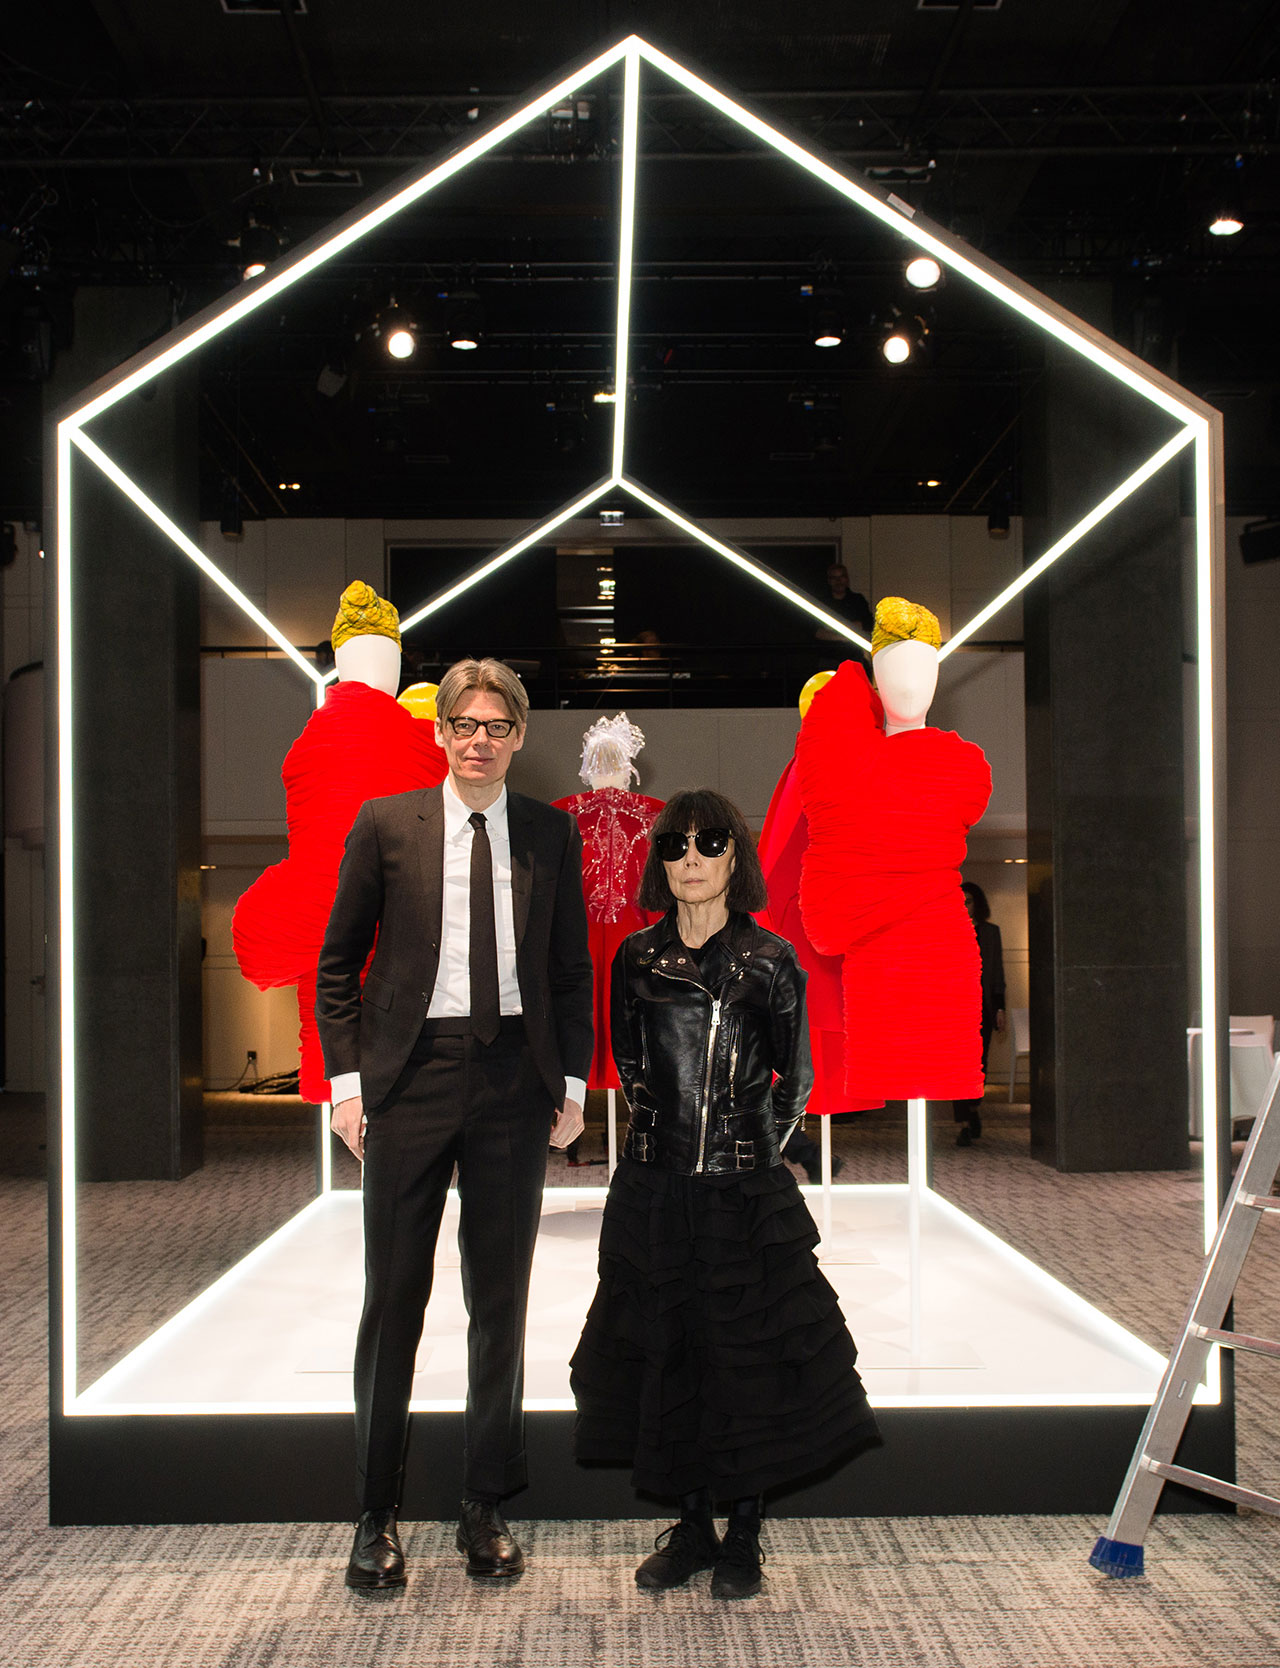 (from left) Andrew Bolton and Rei Kawakubo at The Met's Rei Kawakubo/Comme des Garçons: Art of the In-Between advance press event. Courtesy of The Metropolitan Museum of Art/BFA.com.